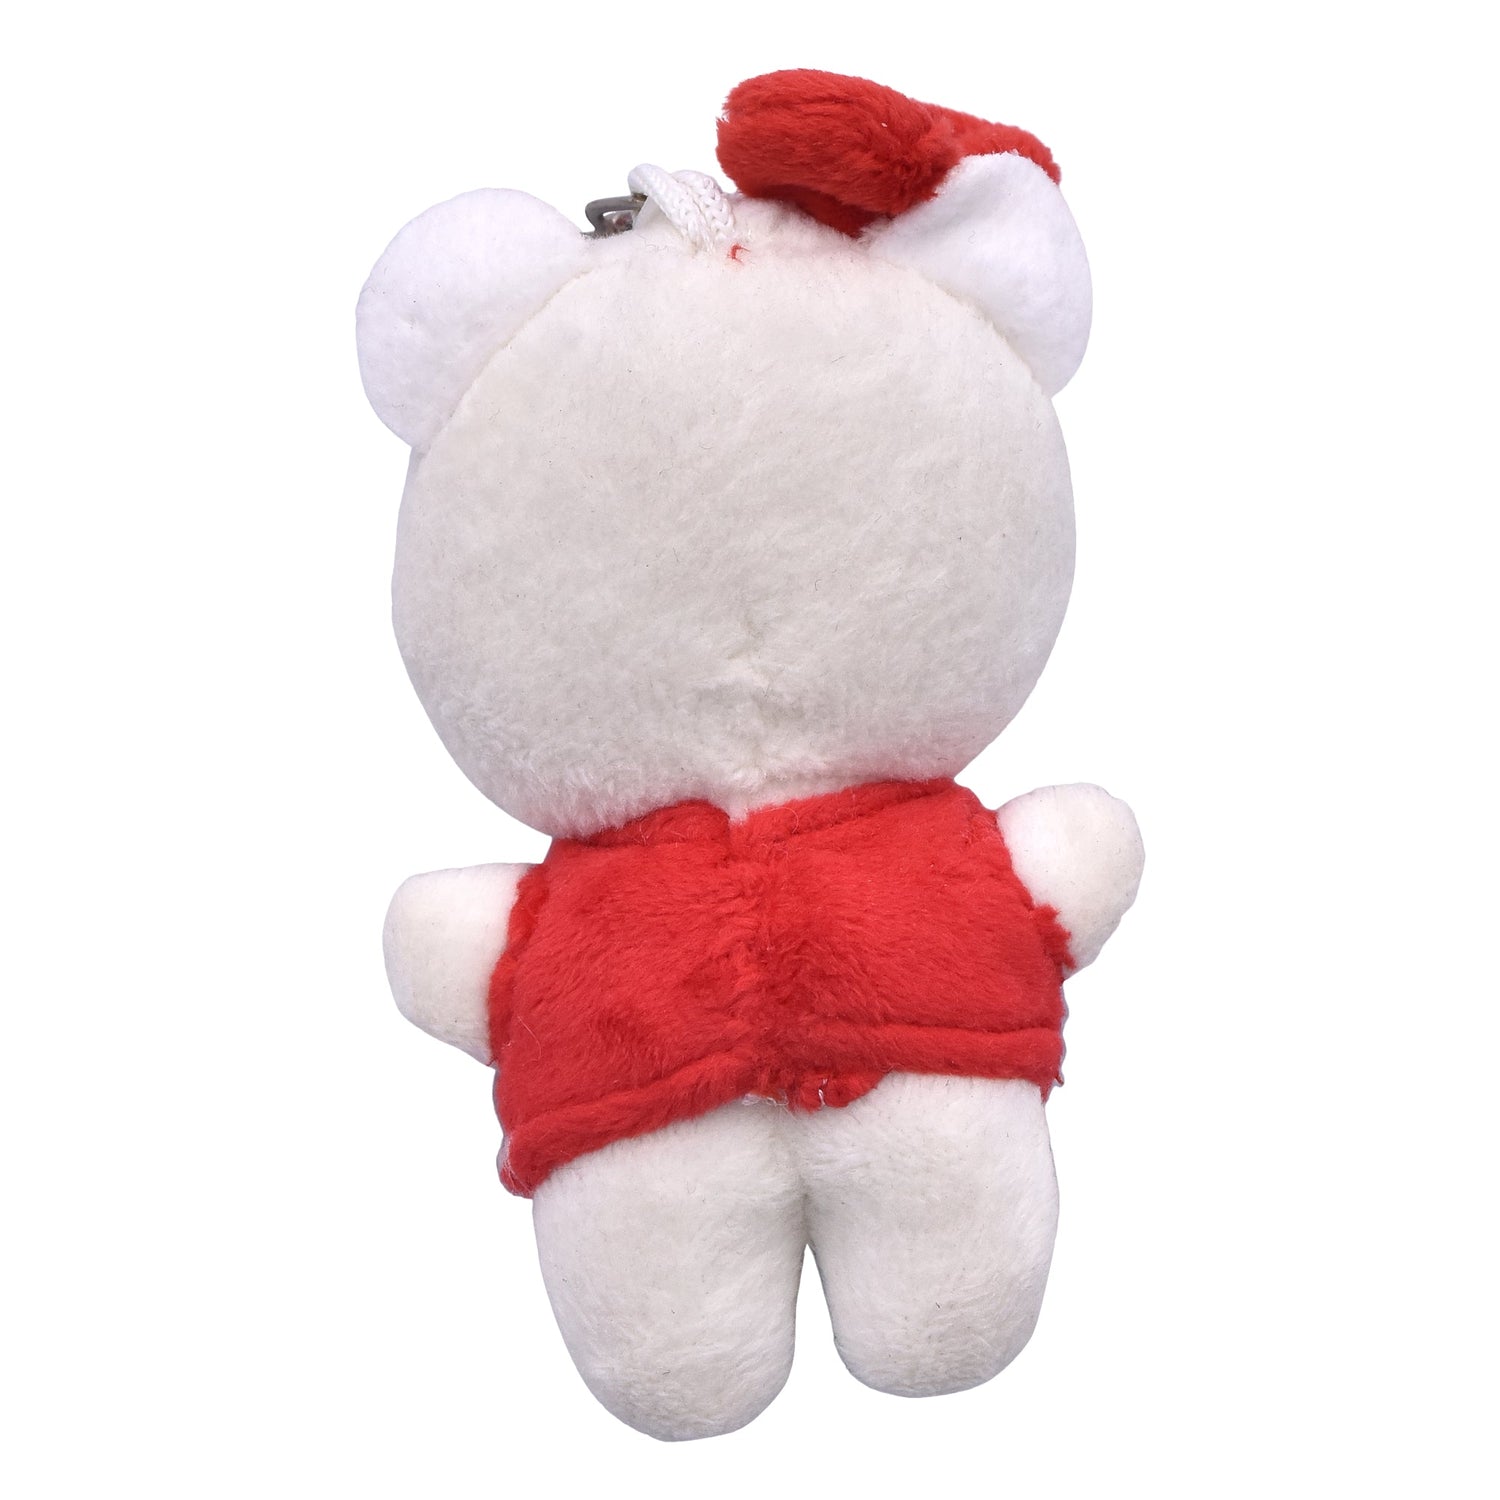 Teddy With A Hairbow Keychain - White And Red Mumuso